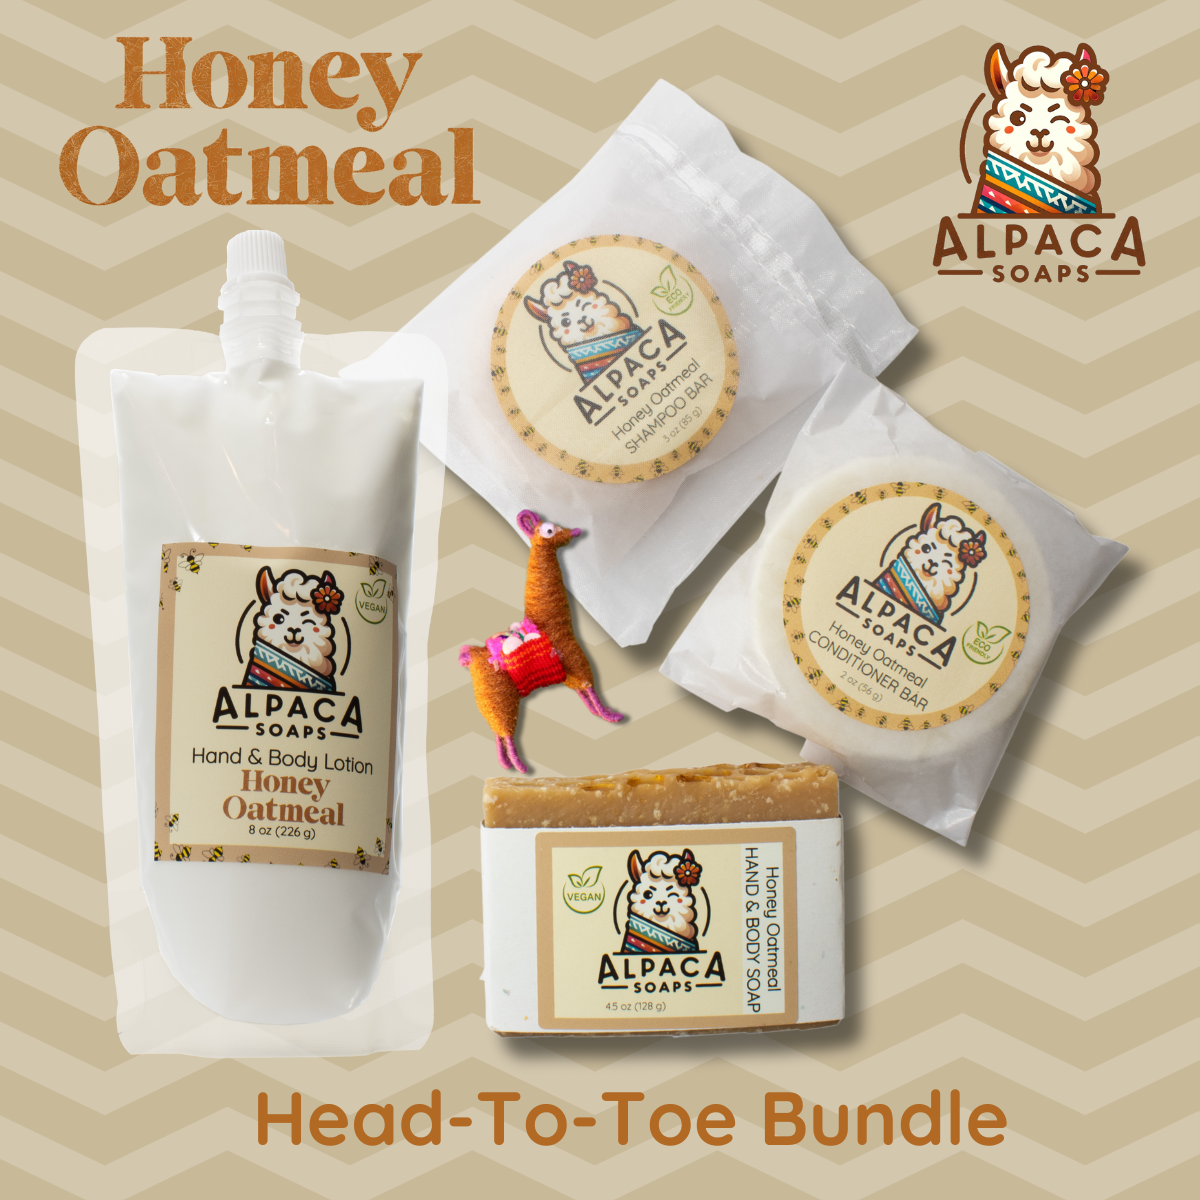 a package of honey oatmeal and a package of soap